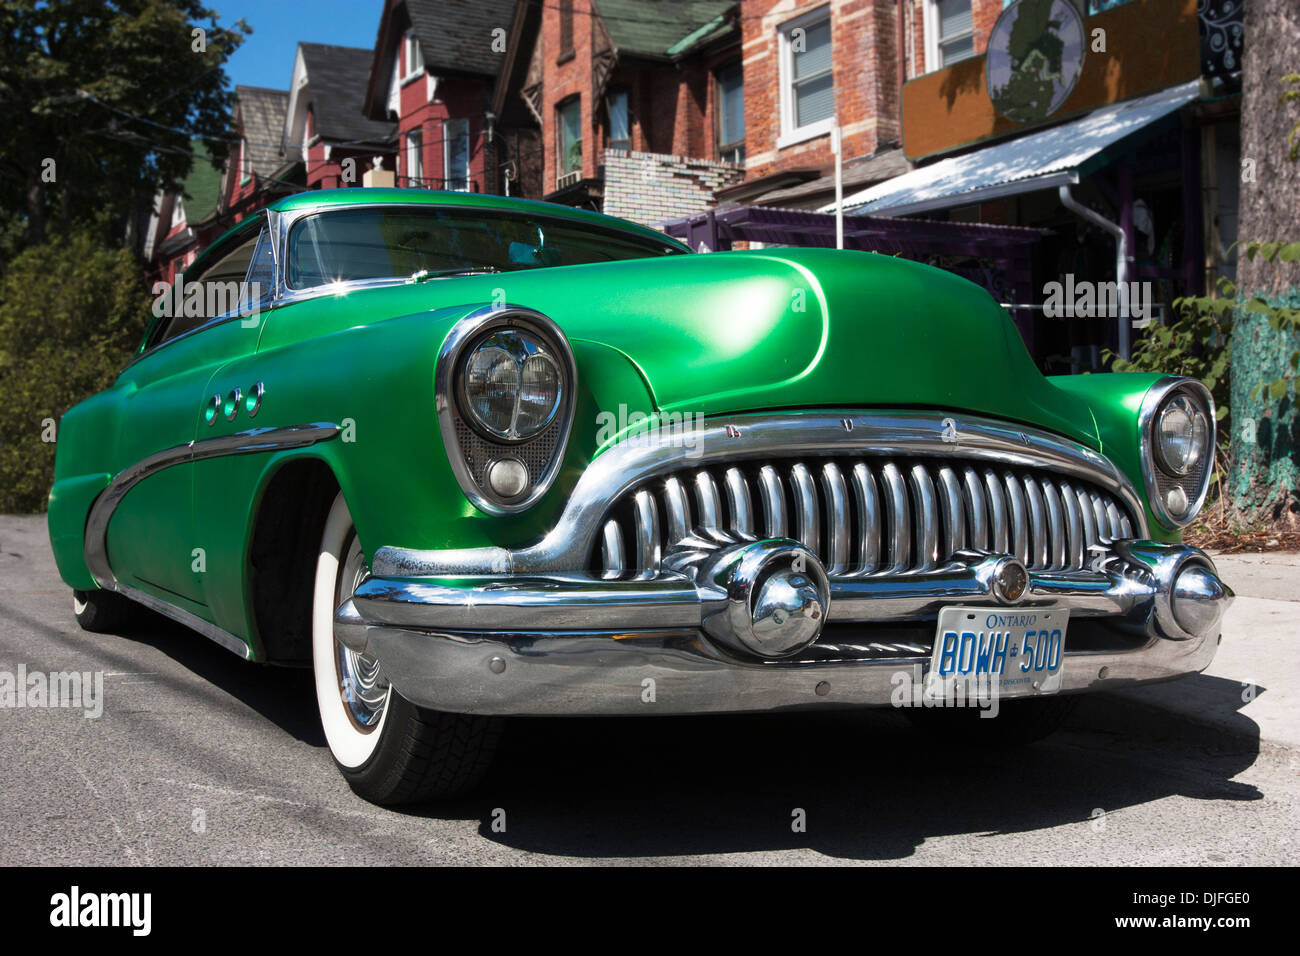 Immaculately restored 1953 vintage Buick Super Riviera Series 50 coupe, Toronto, Canada Stock Photo